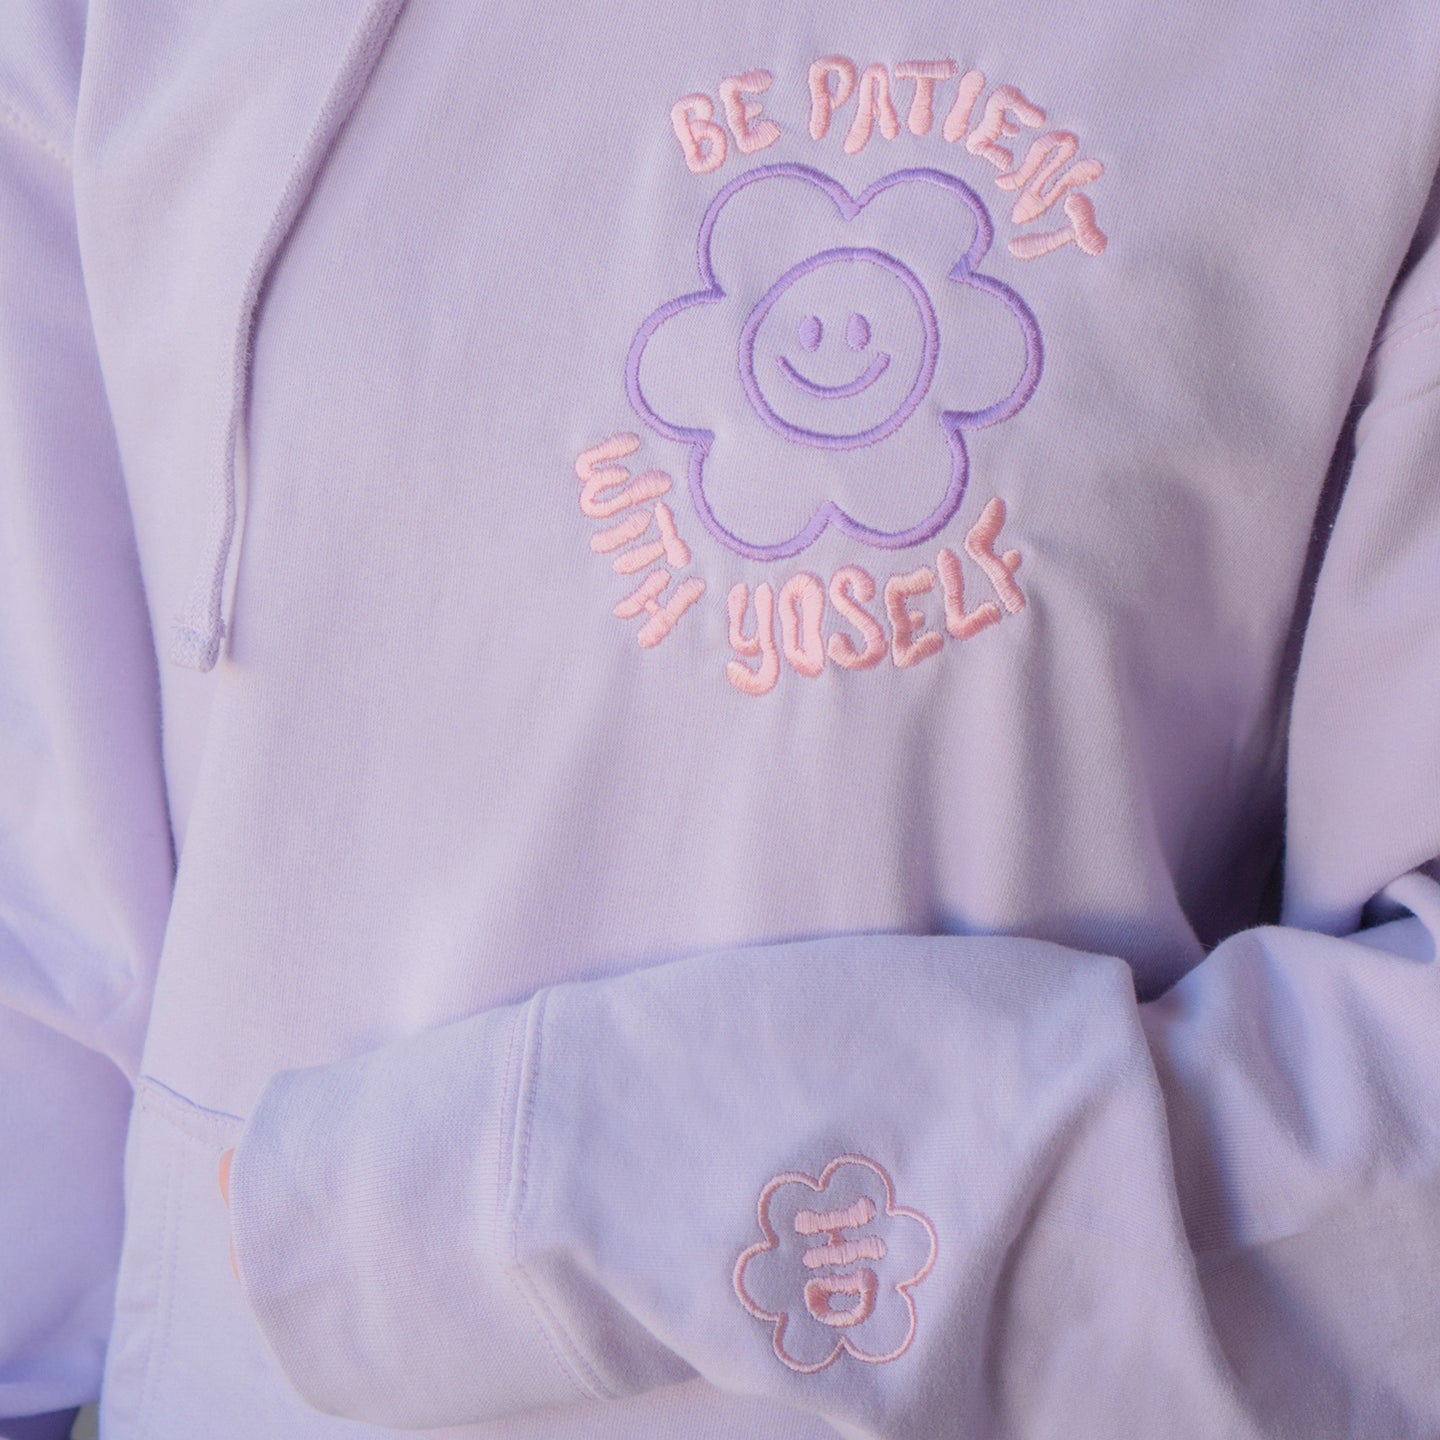 Be Patient With Yoself Hoodie